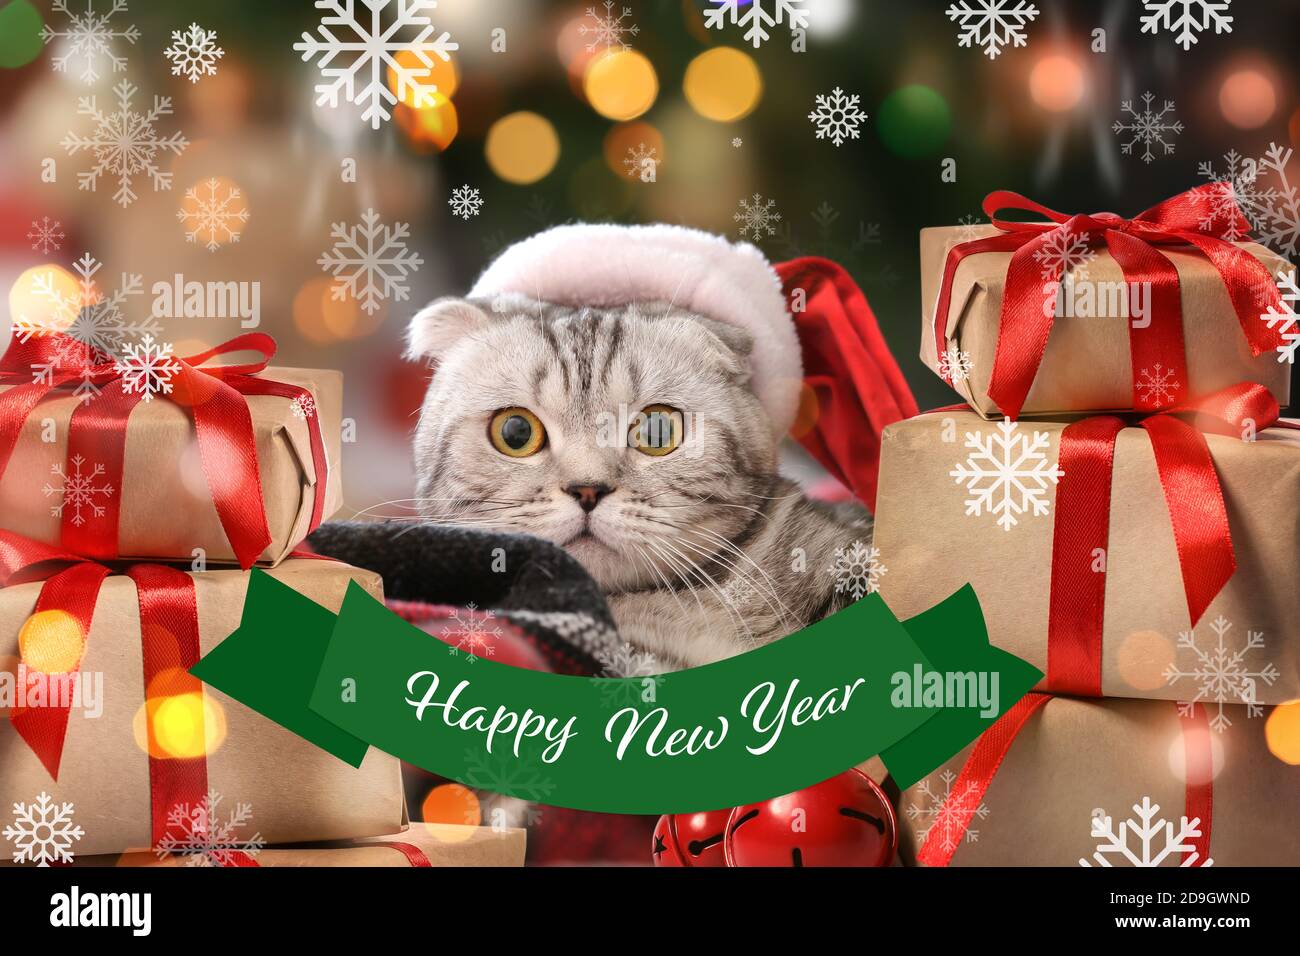 Beautiful New Year greeting card with cute cat Stock Photo - Alamy